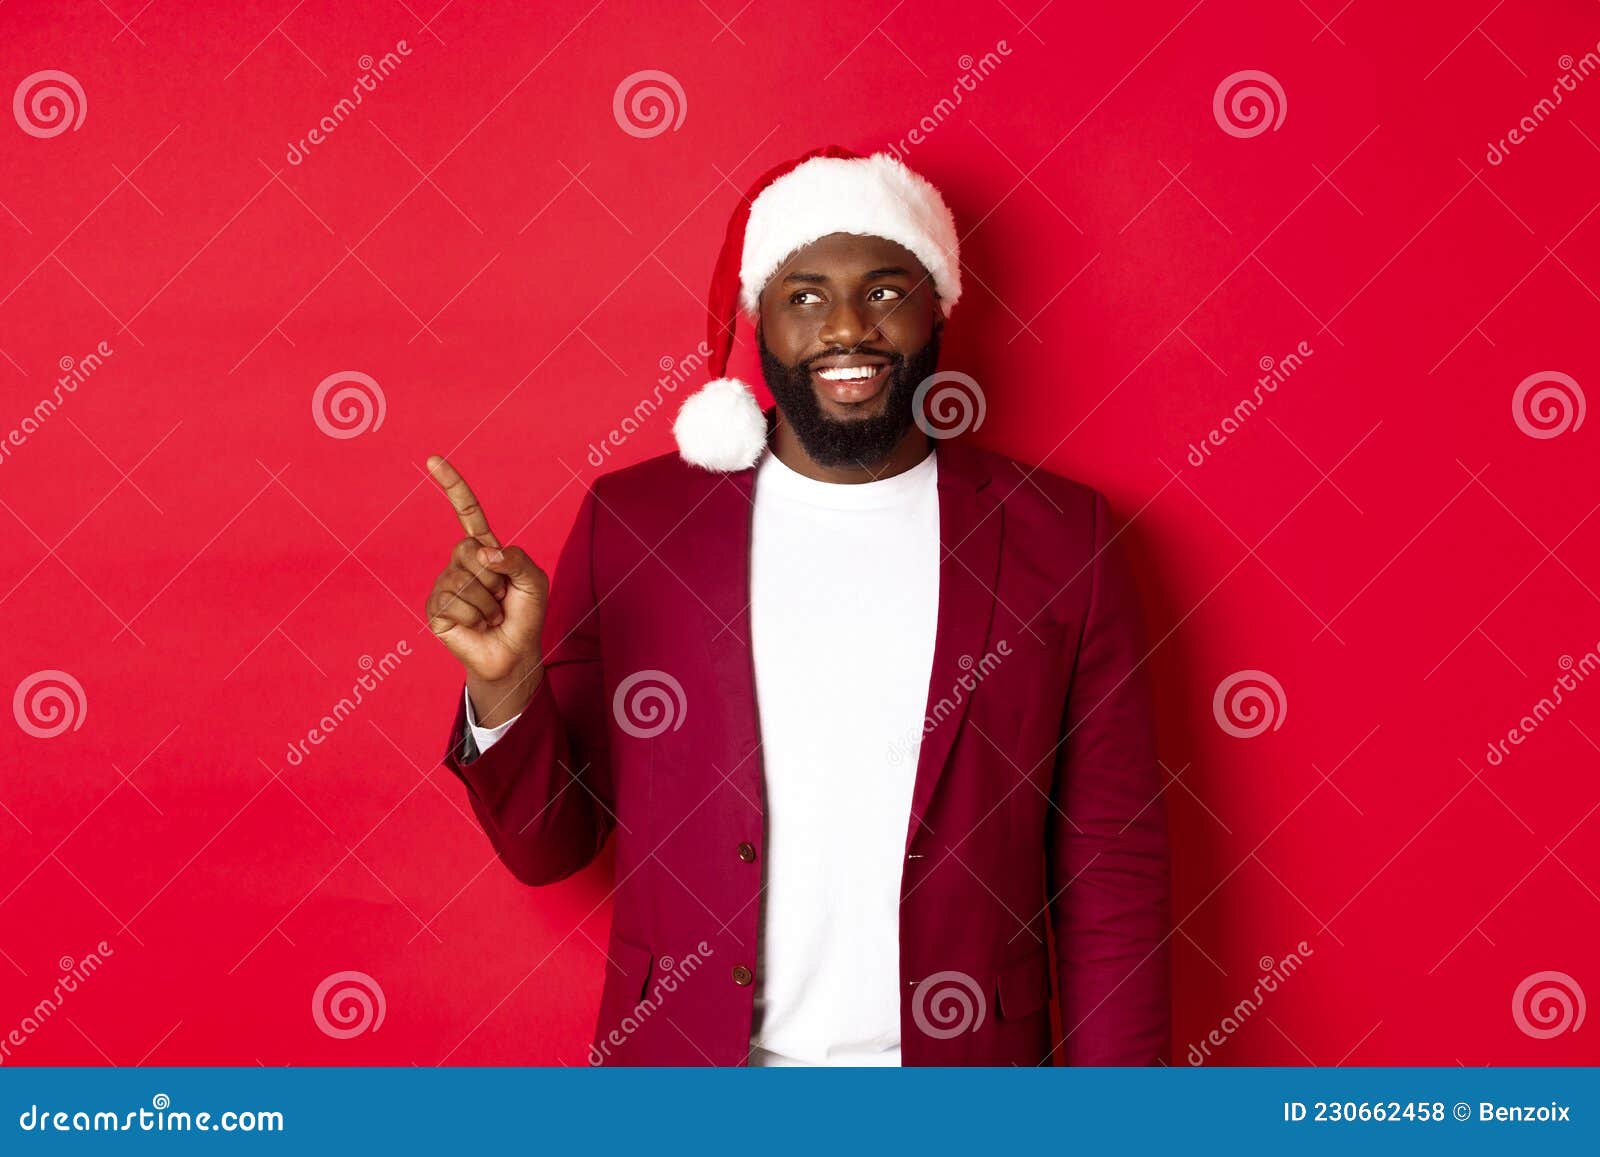 Christmas, Party and Holidays Concept. Cheerful Black Man Smiling ...